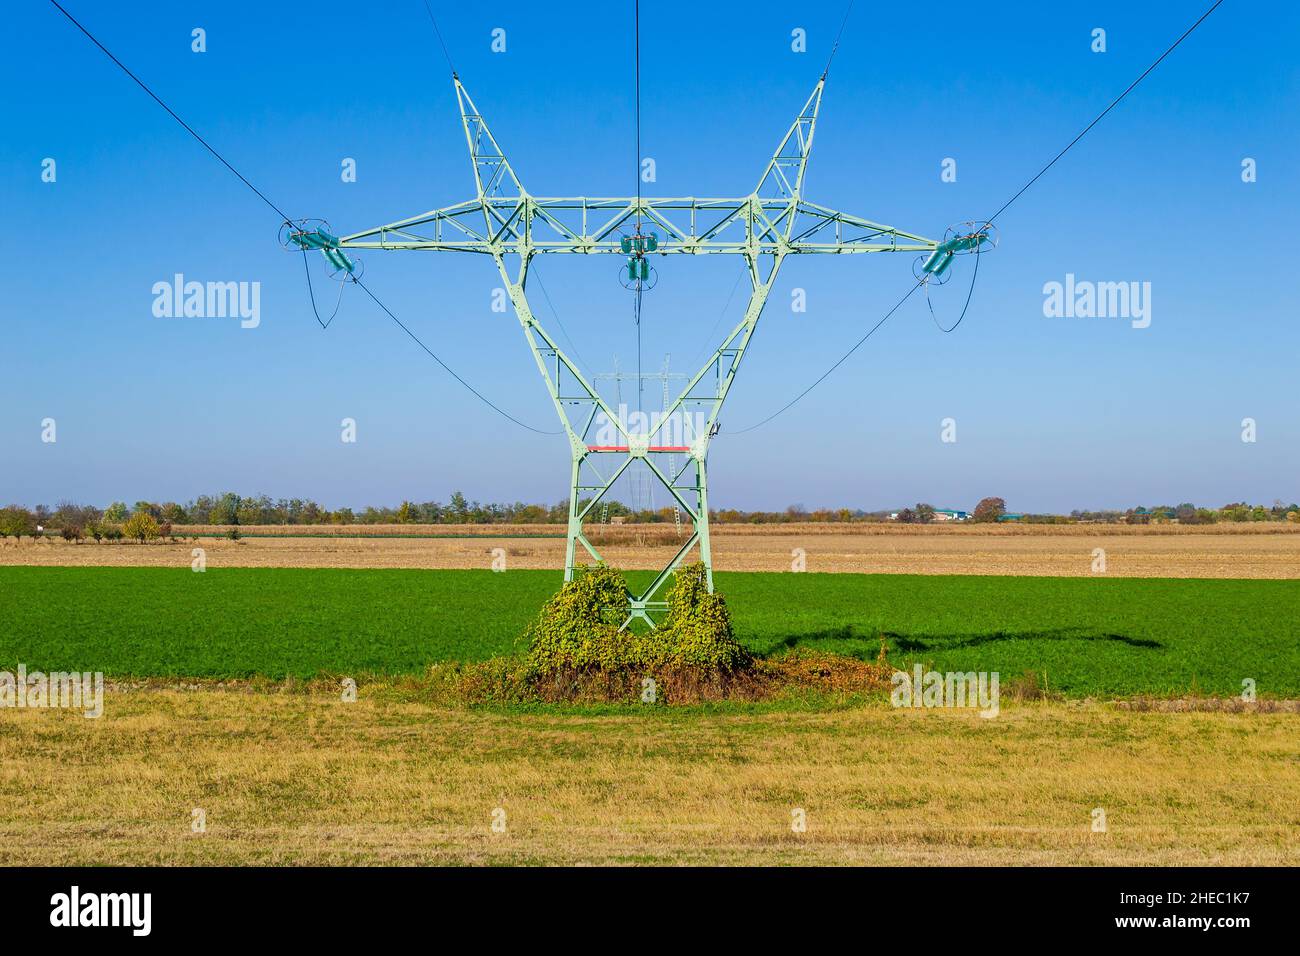 High-voltage electric power lines. Stock Photo